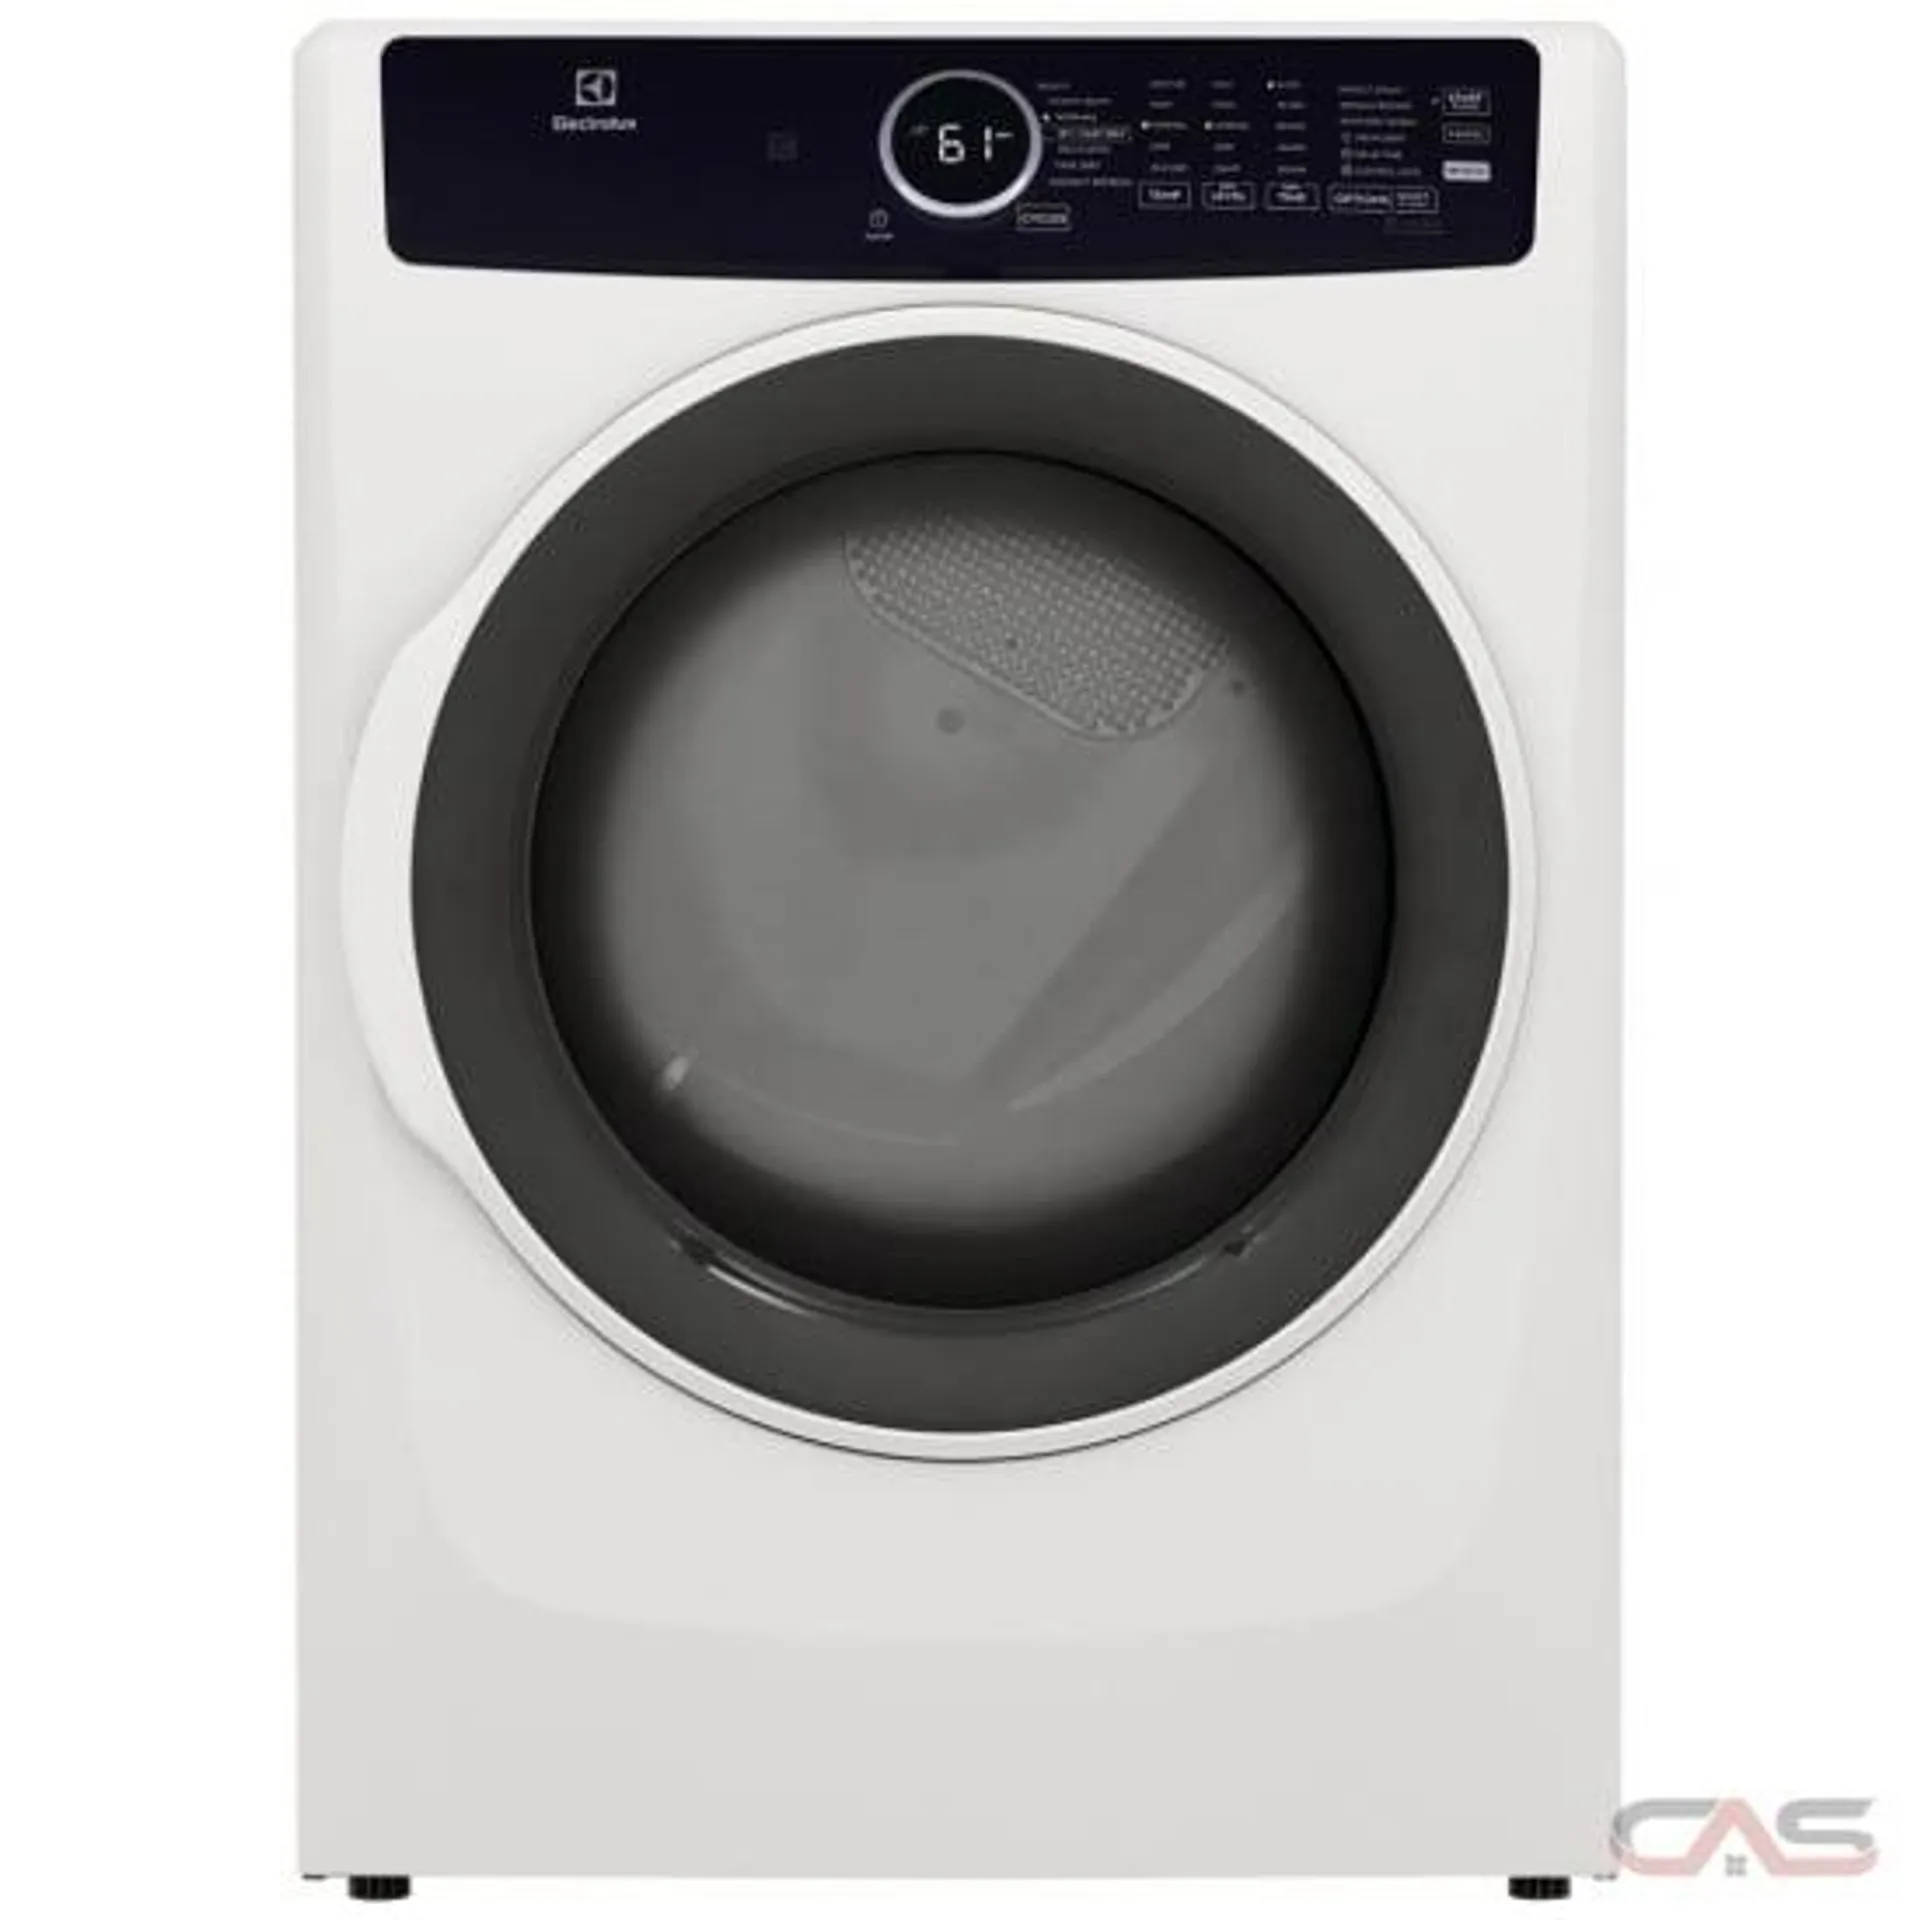 Electrolux ELFG7437AW Dryer, 27 inch Width, Gas, 8.0 cu. ft. Capacity, Steam Clean, 5 Temperature Settings, Stackable, Steel Drum, White colour